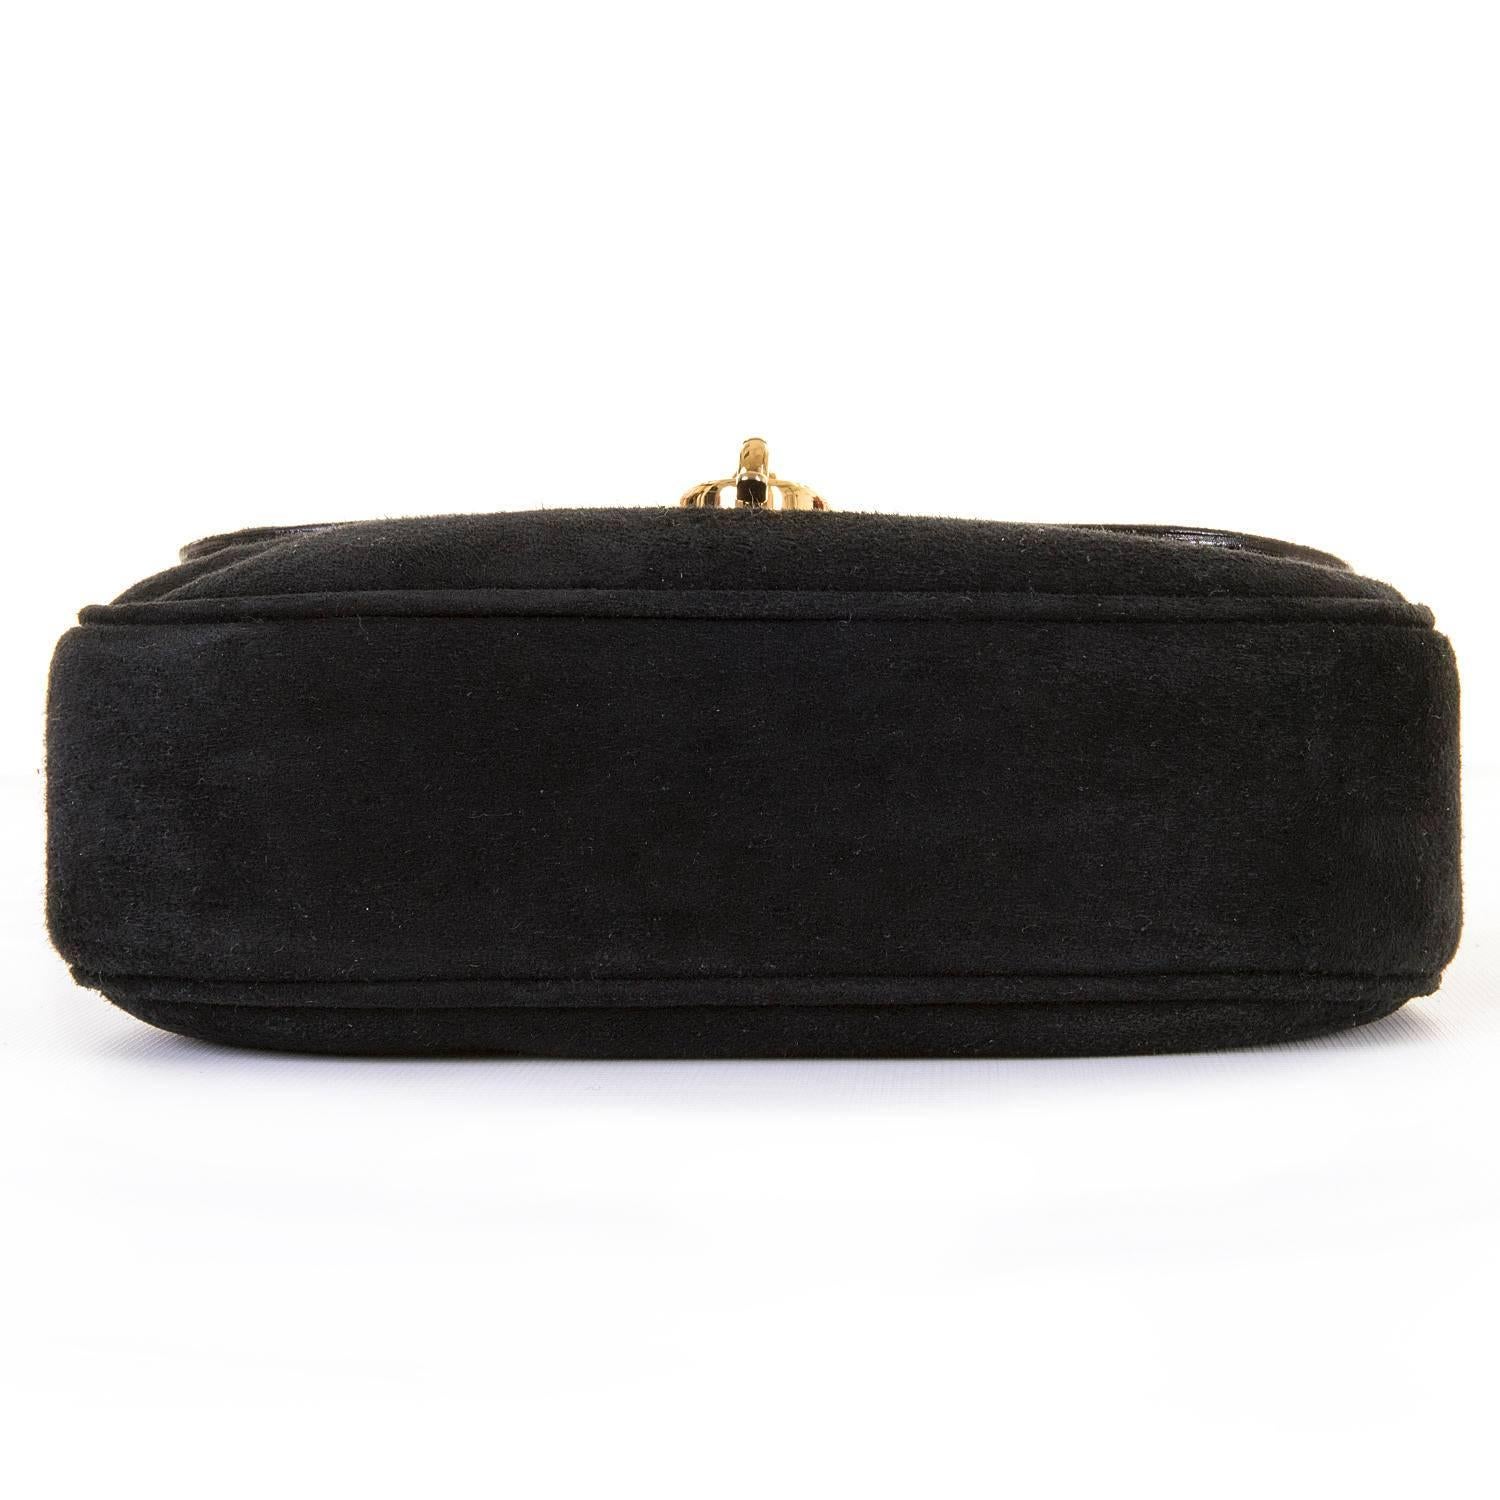 WOW Celine of Paris Black Suede Shoulder or Clutch Bag In Excellent Condition For Sale In By Appointment Only, GB